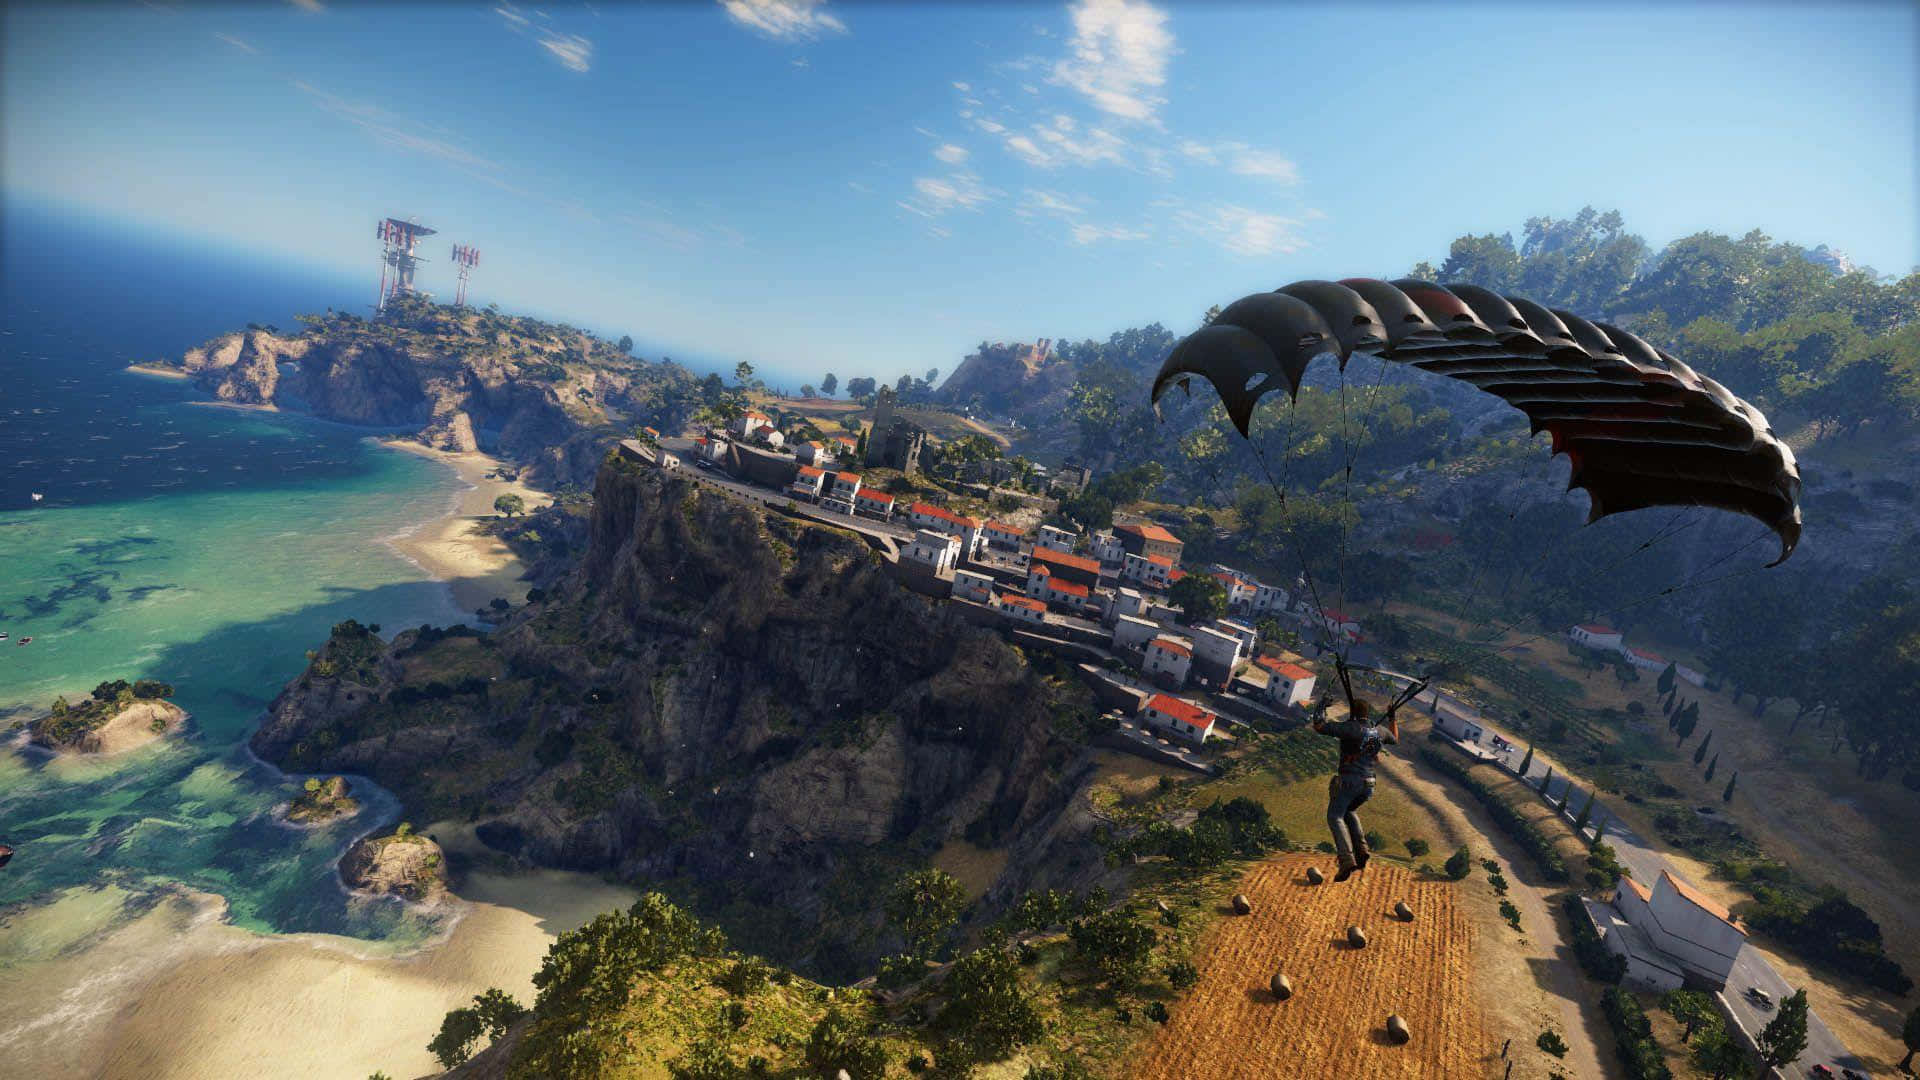 Best Just Cause 4 Background Rico In Parachute Over Island